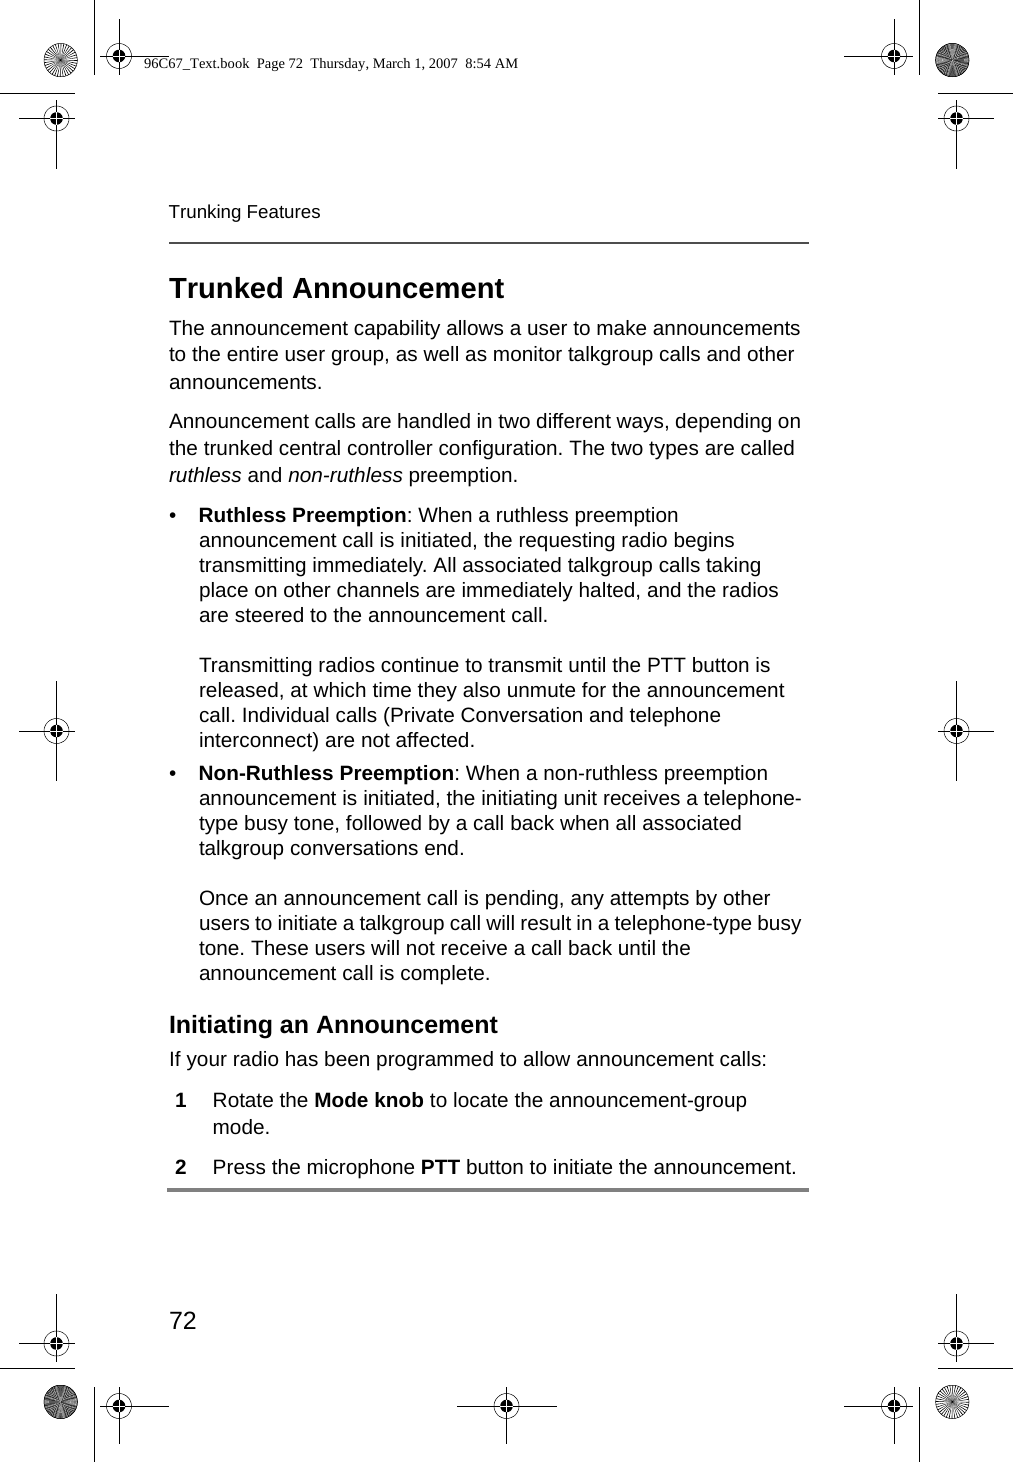 72Trunking FeaturesTrunked AnnouncementThe announcement capability allows a user to make announcements to the entire user group, as well as monitor talkgroup calls and other announcements.Announcement calls are handled in two different ways, depending on the trunked central controller configuration. The two types are called ruthless and non-ruthless preemption.•Ruthless Preemption: When a ruthless preemption announcement call is initiated, the requesting radio begins transmitting immediately. All associated talkgroup calls taking place on other channels are immediately halted, and the radios are steered to the announcement call.Transmitting radios continue to transmit until the PTT button is released, at which time they also unmute for the announcement call. Individual calls (Private Conversation and telephone interconnect) are not affected.•Non-Ruthless Preemption: When a non-ruthless preemption announcement is initiated, the initiating unit receives a telephone-type busy tone, followed by a call back when all associated talkgroup conversations end.Once an announcement call is pending, any attempts by other users to initiate a talkgroup call will result in a telephone-type busy tone. These users will not receive a call back until the announcement call is complete.Initiating an AnnouncementIf your radio has been programmed to allow announcement calls:1Rotate the Mode knob to locate the announcement-group mode.2Press the microphone PTT button to initiate the announcement.96C67_Text.book  Page 72  Thursday, March 1, 2007  8:54 AM